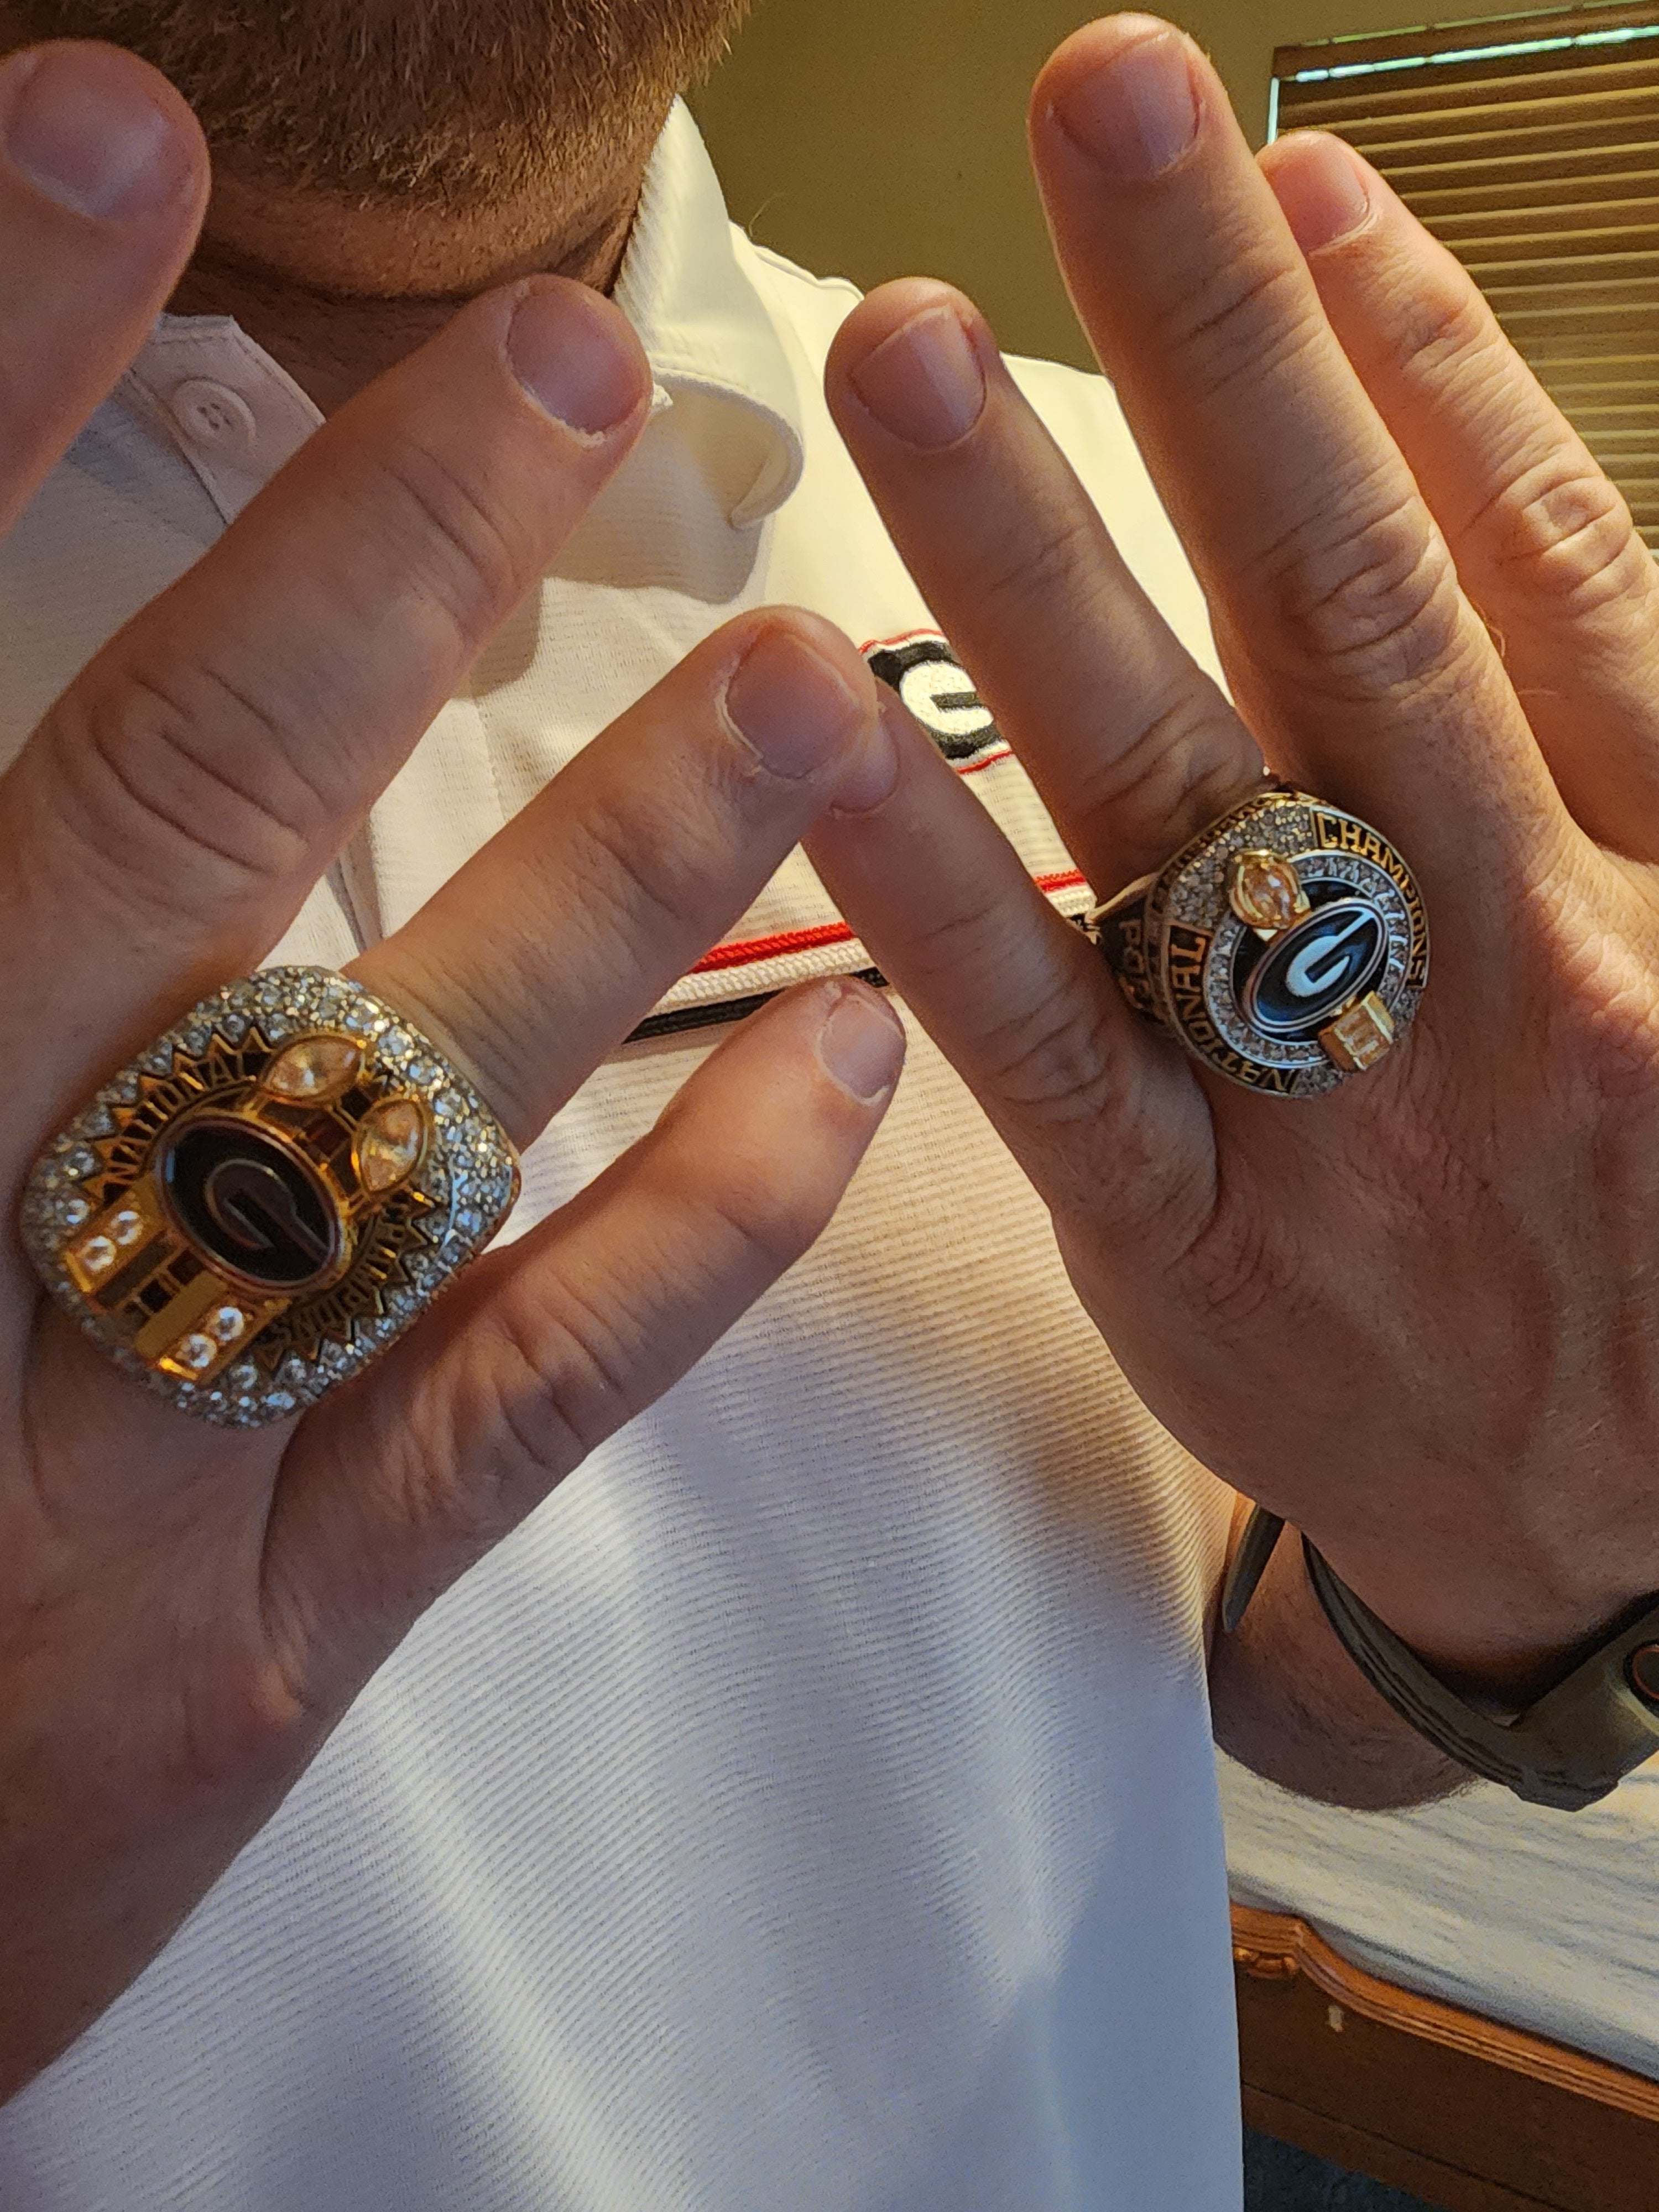 The Denver Nuggets' 2023 NBA championship rings unveiled